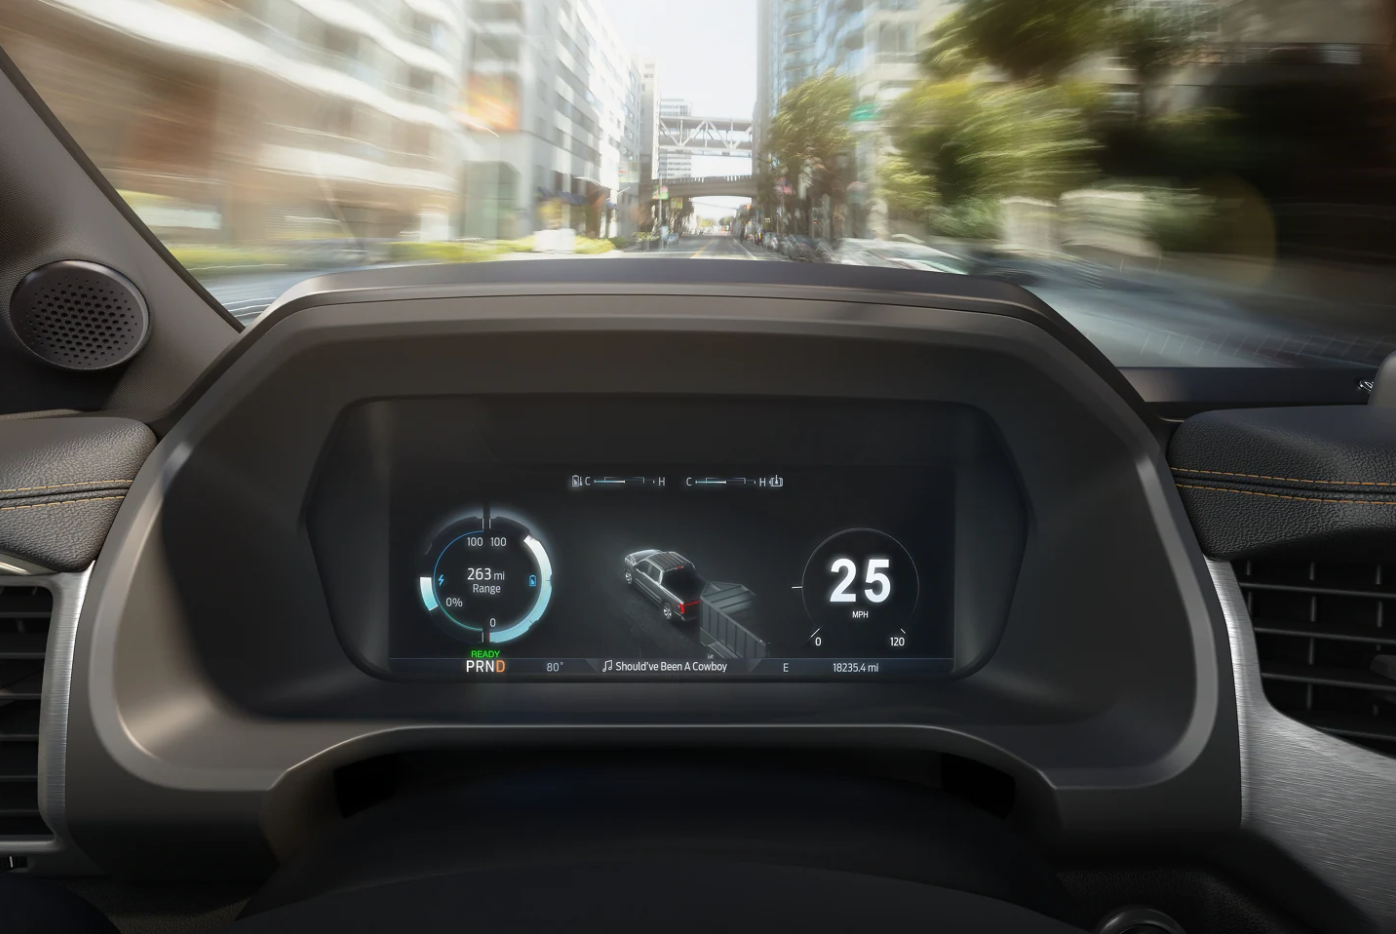 The all-digital dash of a 2022 Ford F-150 Lightning electric truck